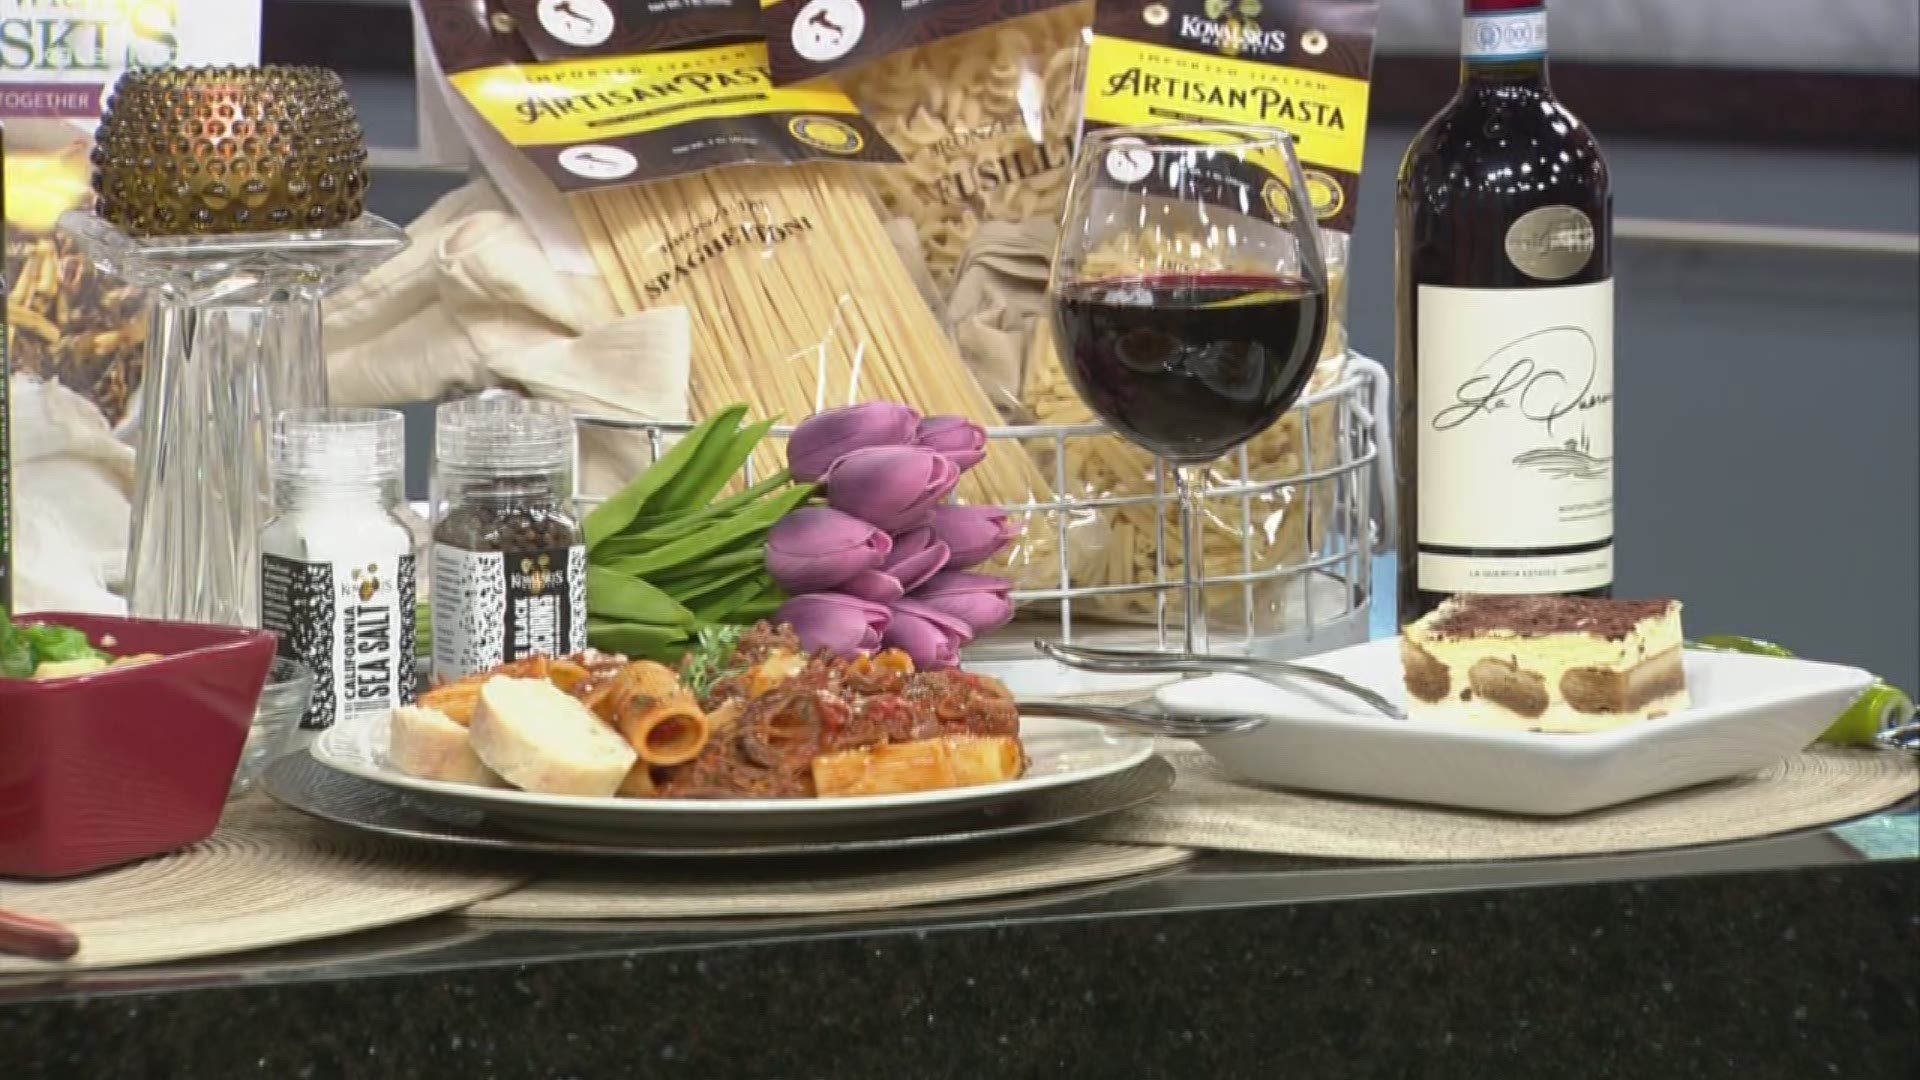 Rachael Perron shares some tips straight from Italy for a perfect pasta recipe from Kowalski’s.